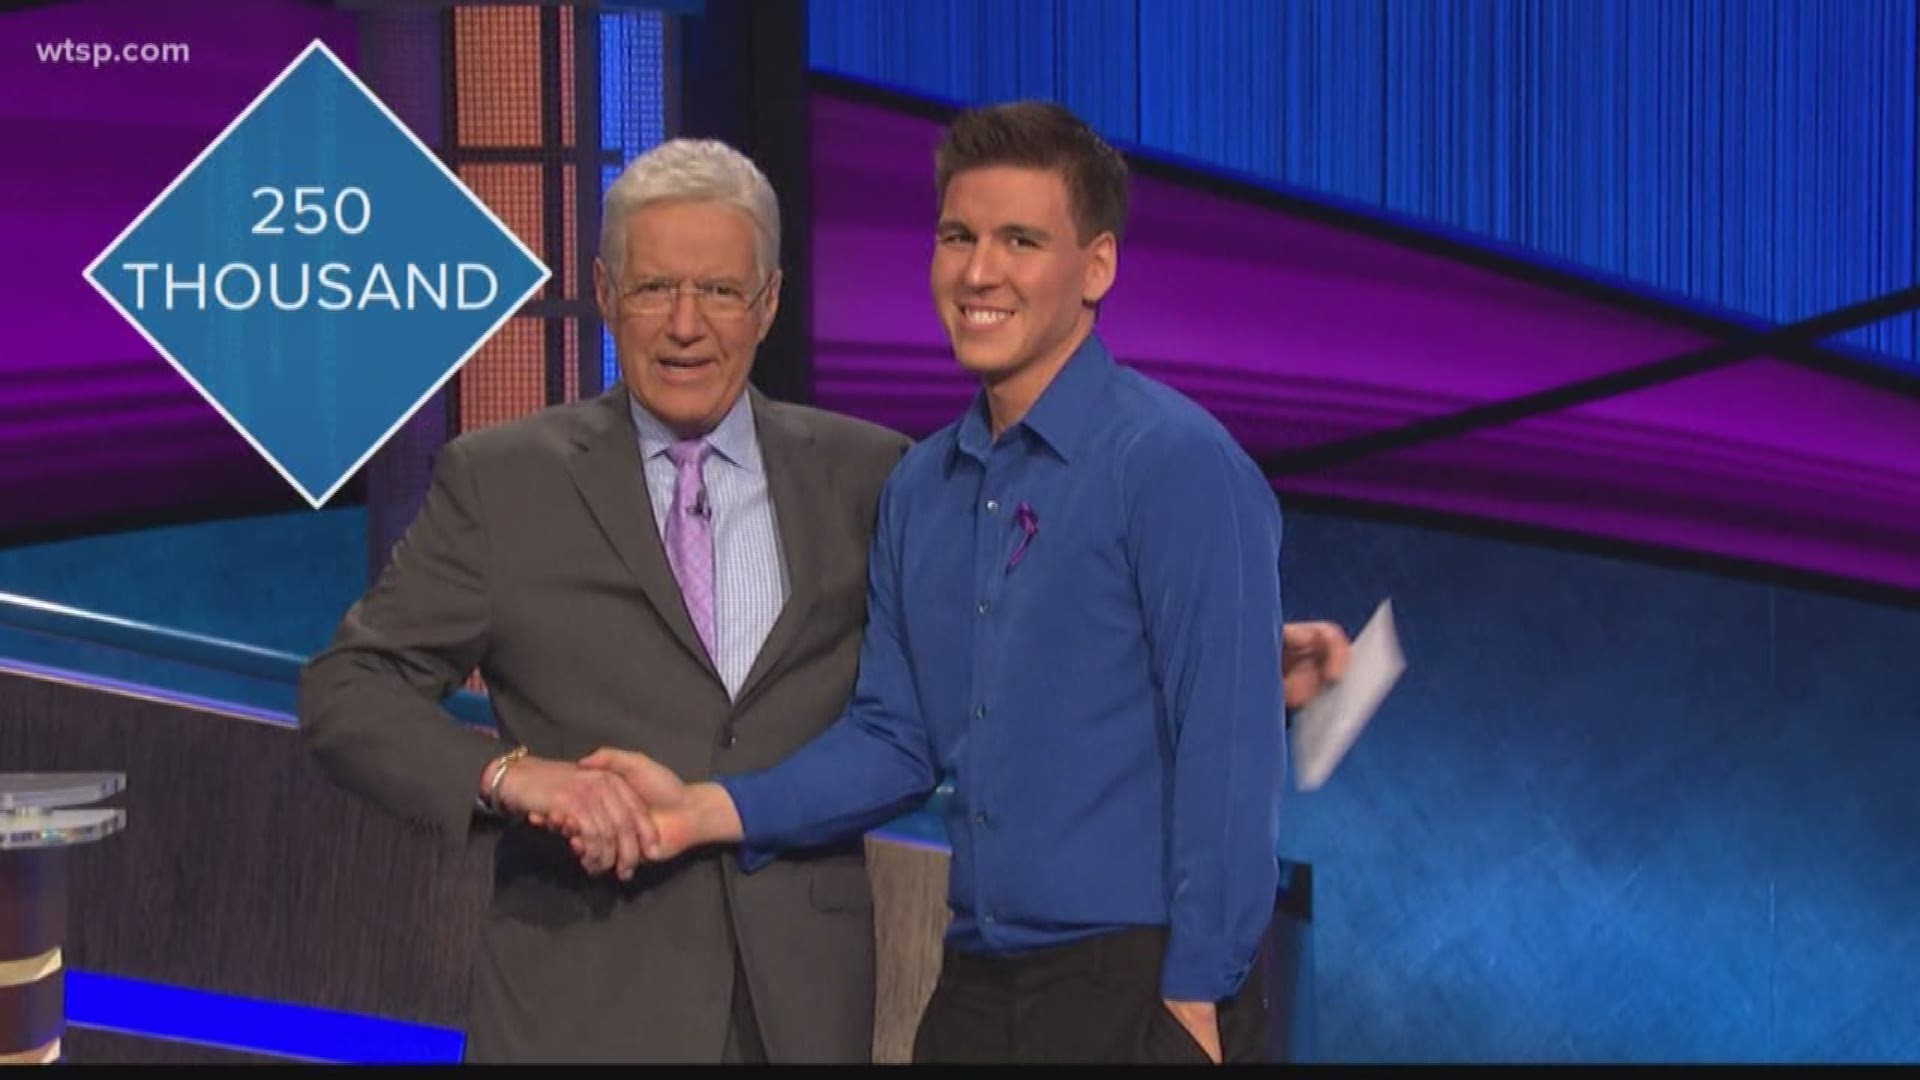 “JEOPARDY! James” Holzhauer lived up to his nickname when he took down Emma Boettcher and Francois Barcomb to win the 2019 Tournament of Champions Friday.